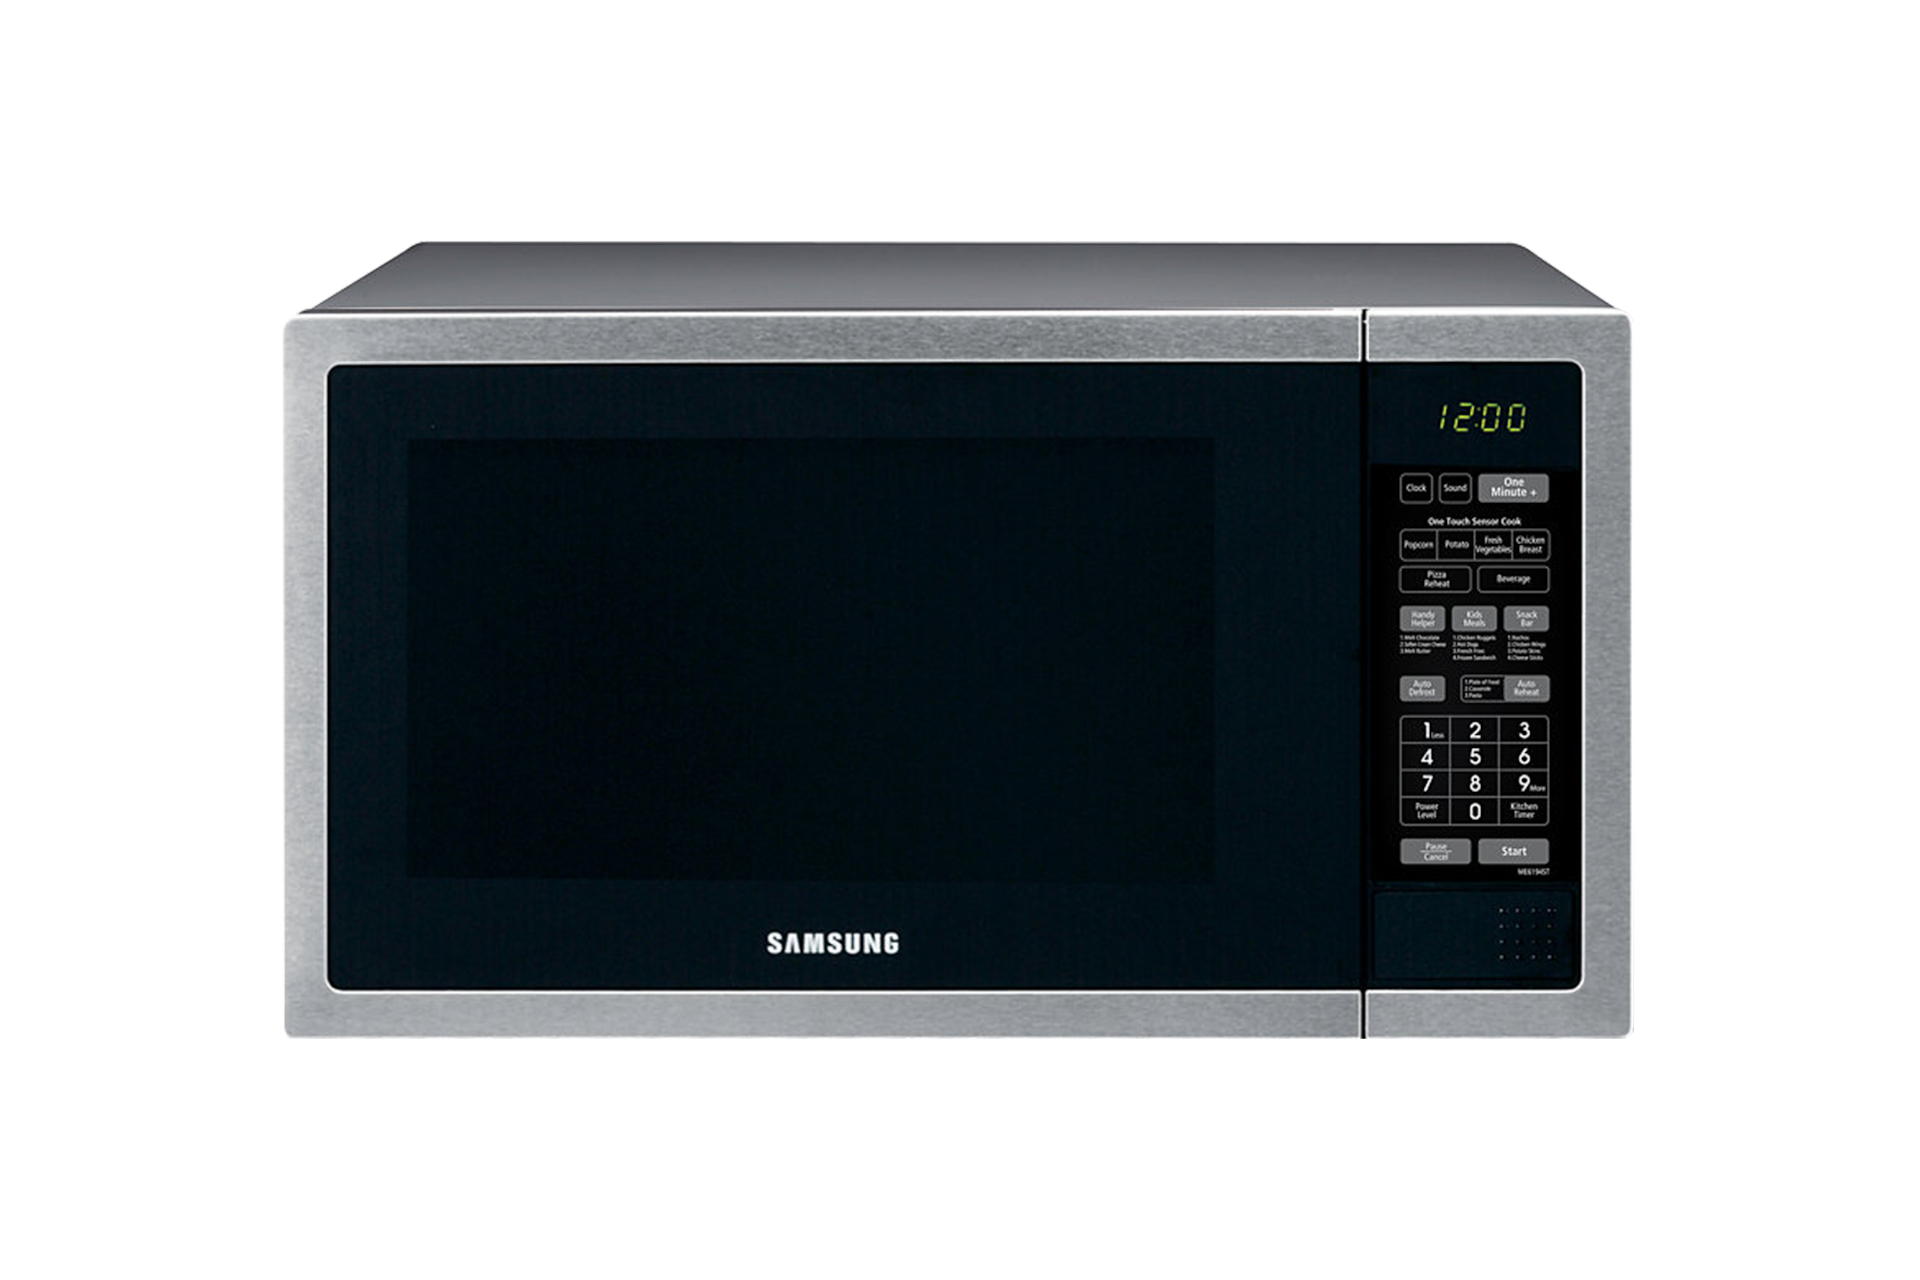 55L, Electronic Solo, Microwave Oven, With Sensor Cook Technology, ME6194ST